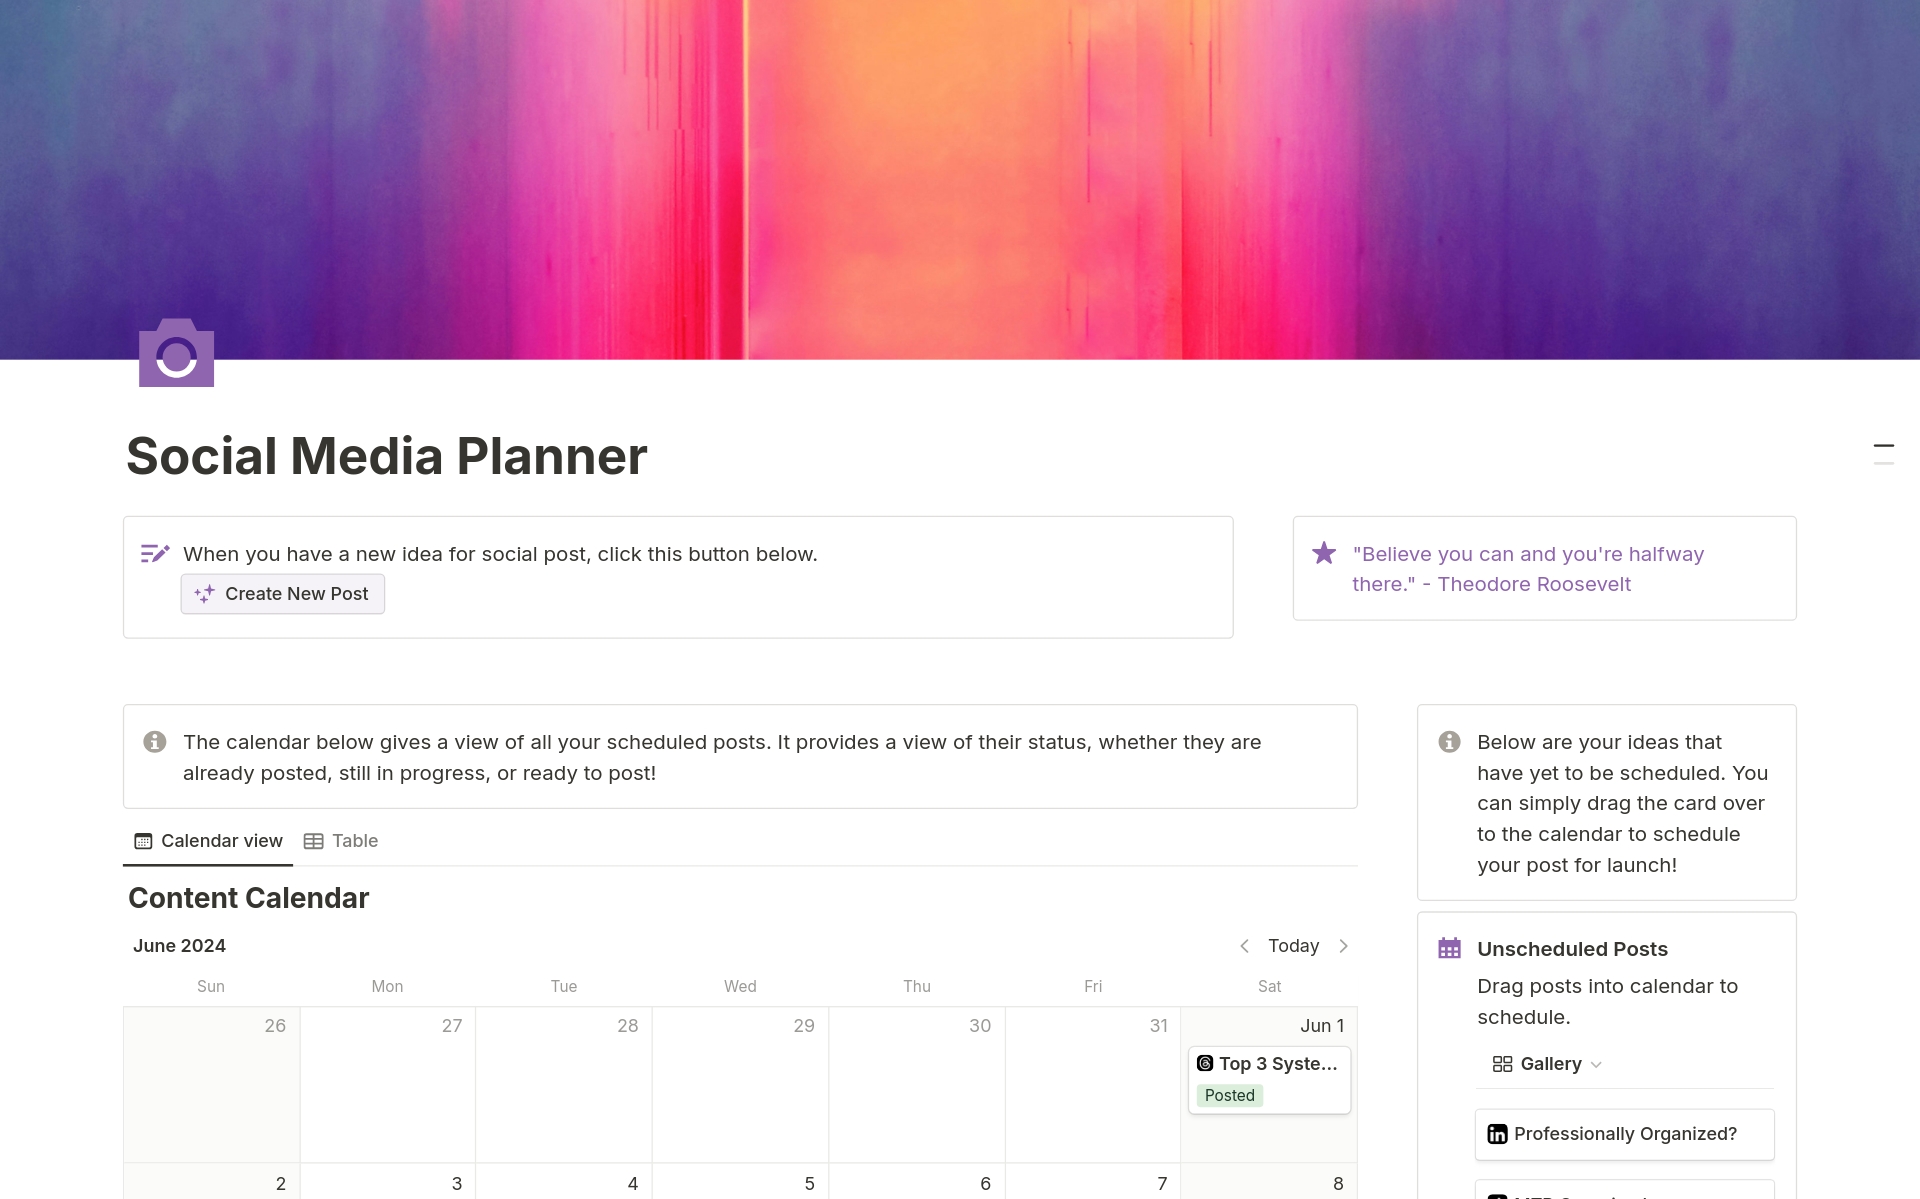 The Social Media Planner. A visual system to plan, schedule, and manage your social media posts. The ultimate tool for every social media manager.